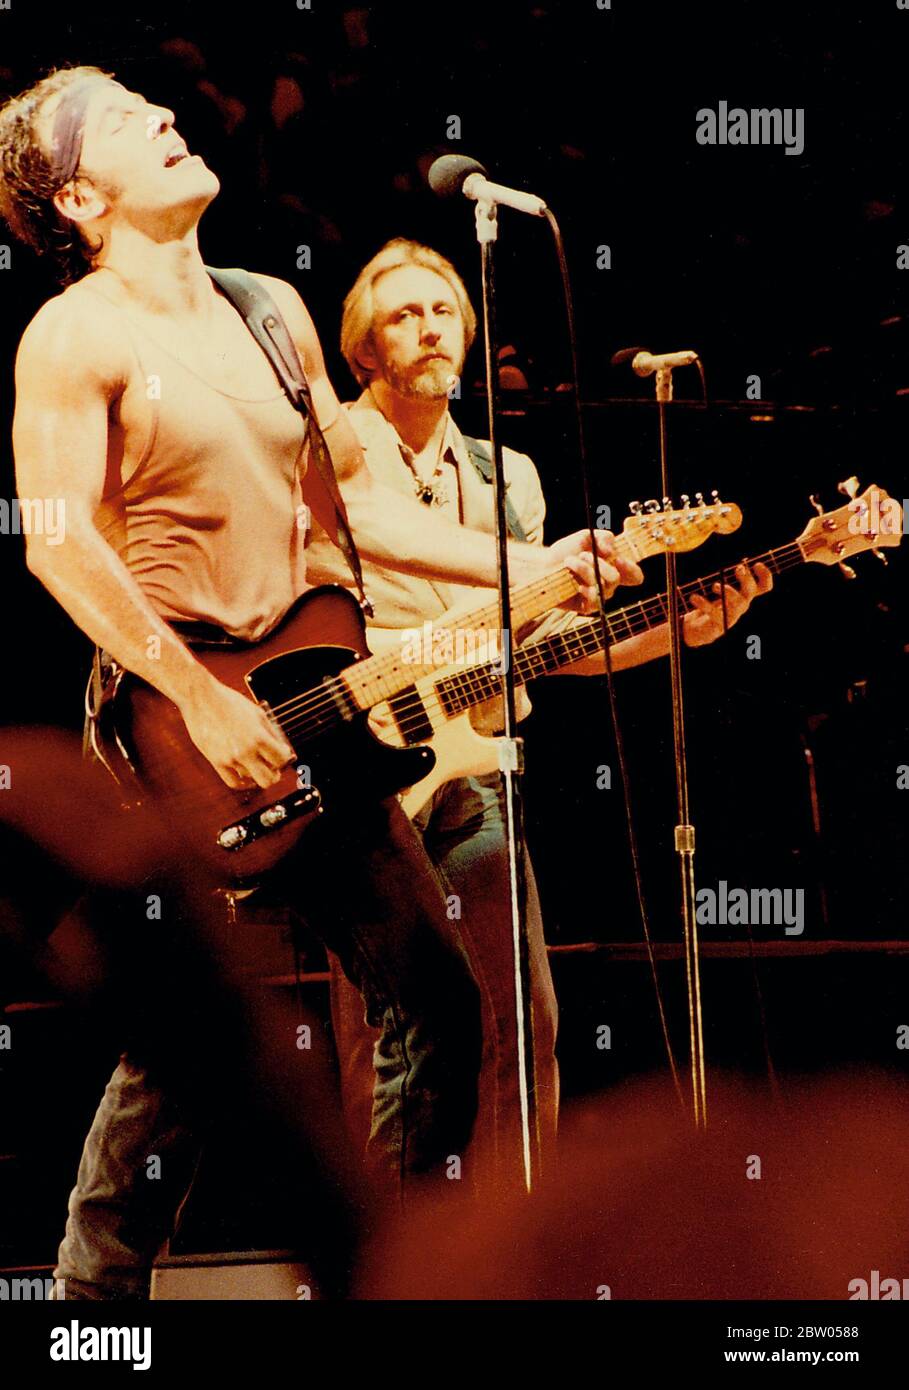 BRUCE SPRINGSTEEN and John Entwistle ,THE MEADOWLANDS, EAST RUTHERFORD, NJ  08-08-1984 PHOTO BY MICHAEL BRITO BRUCE SPRINGSTEEN JOHN ENTWISTLE OF THE  WHO PLAYING TWIST AND SHOUT Stock Photo - Alamy